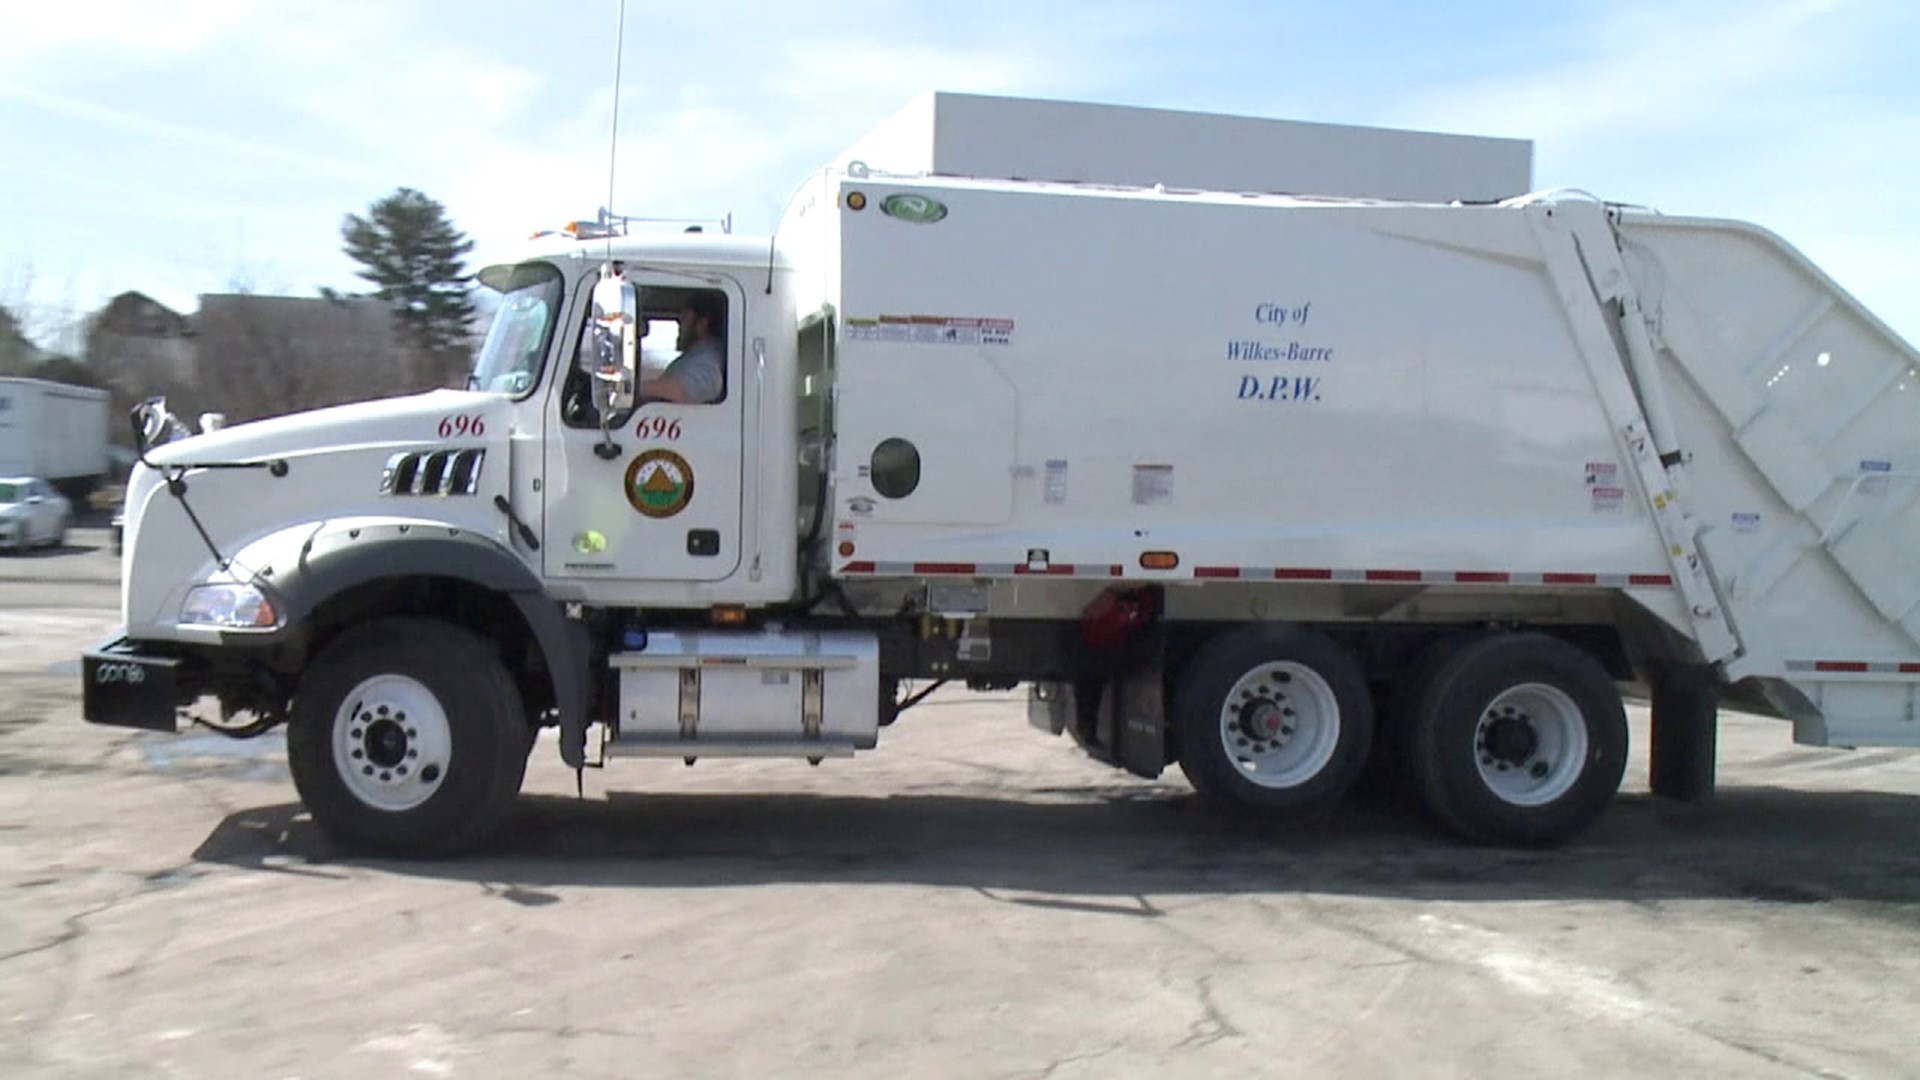 The city of Wilkes-Barre's Department of Public Works welcomed four new vehicles Tuesday.